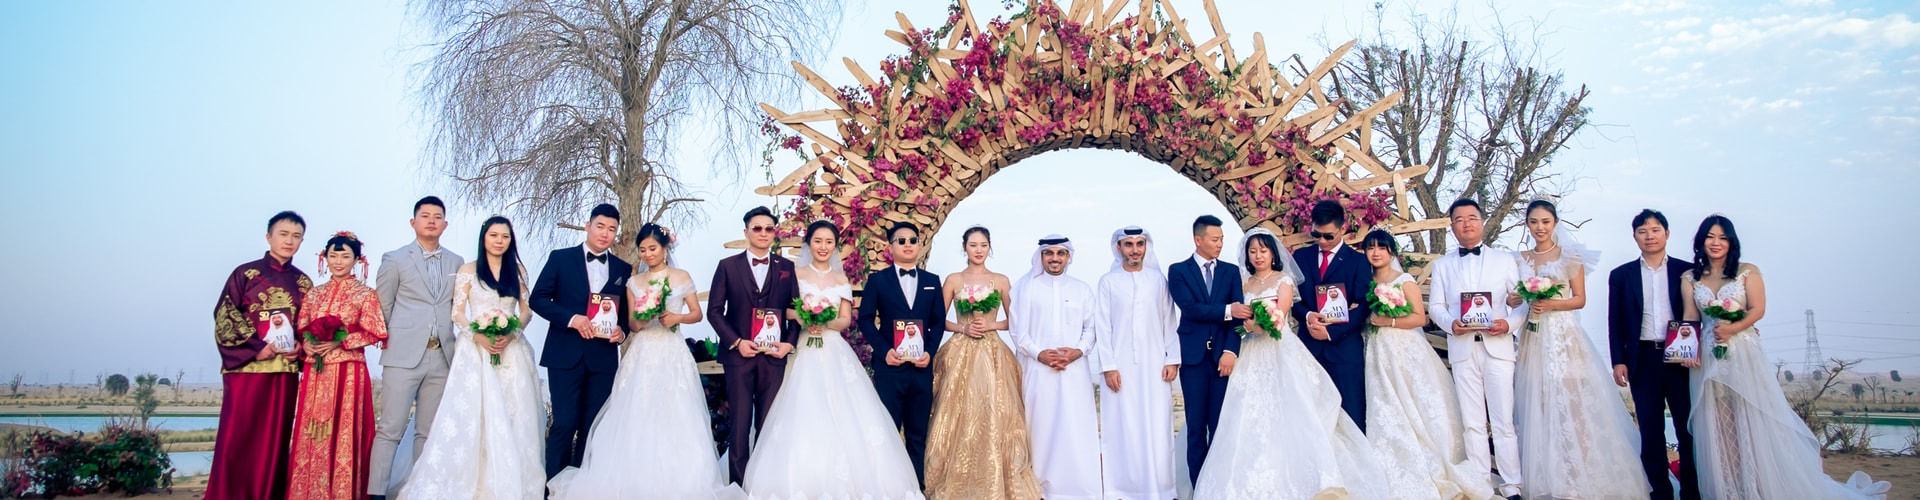 Watch: Dubai’s Love Lakes Transform into Stunning Wedding Destination for Chinese Couples